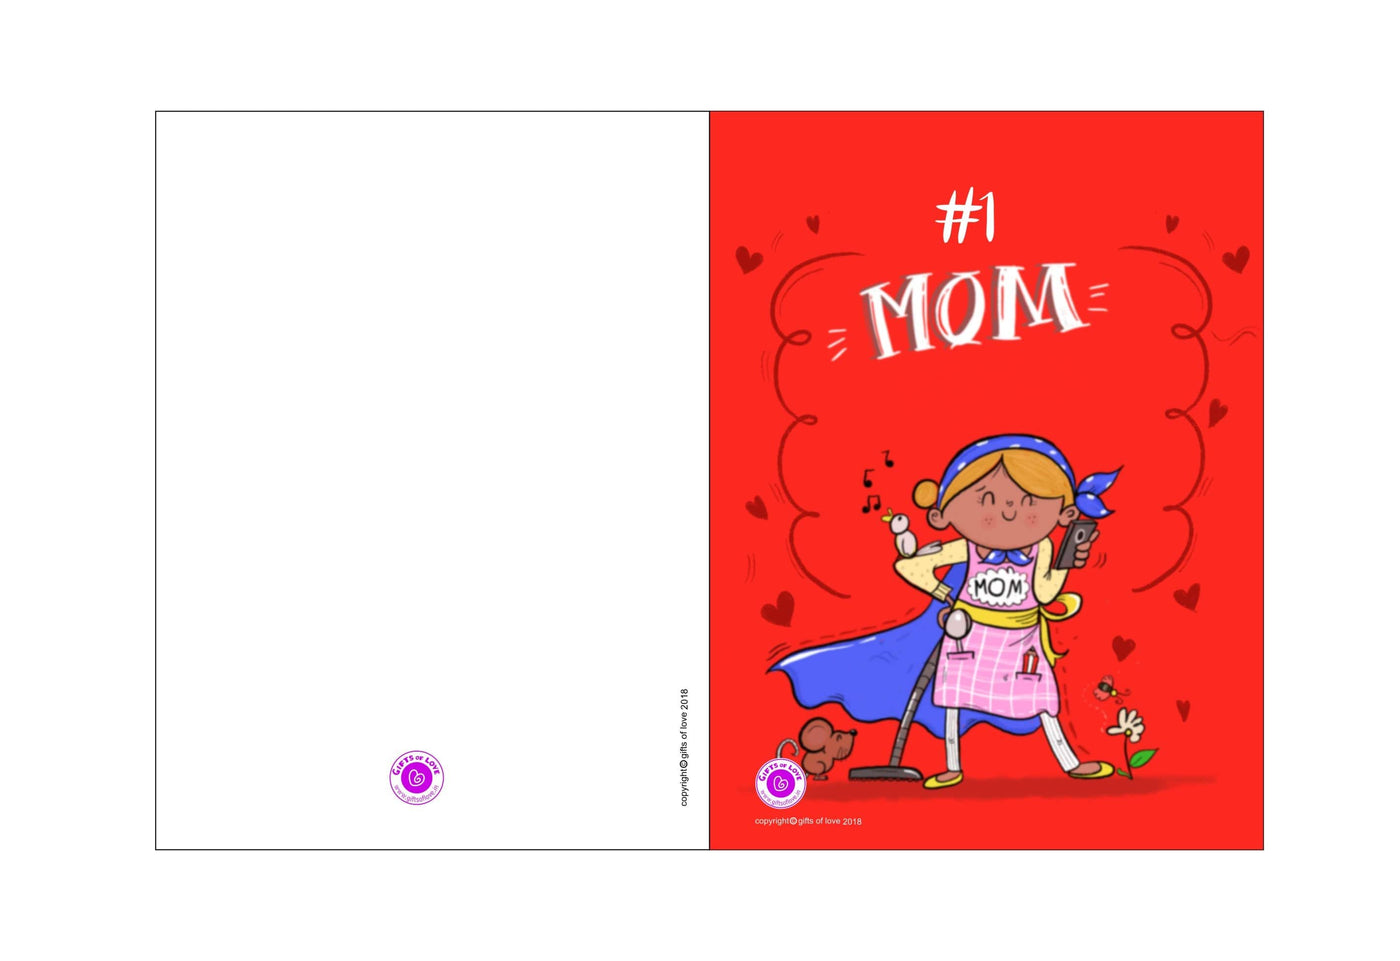 Greeting Card Printable #1 MOM 5x3.75in